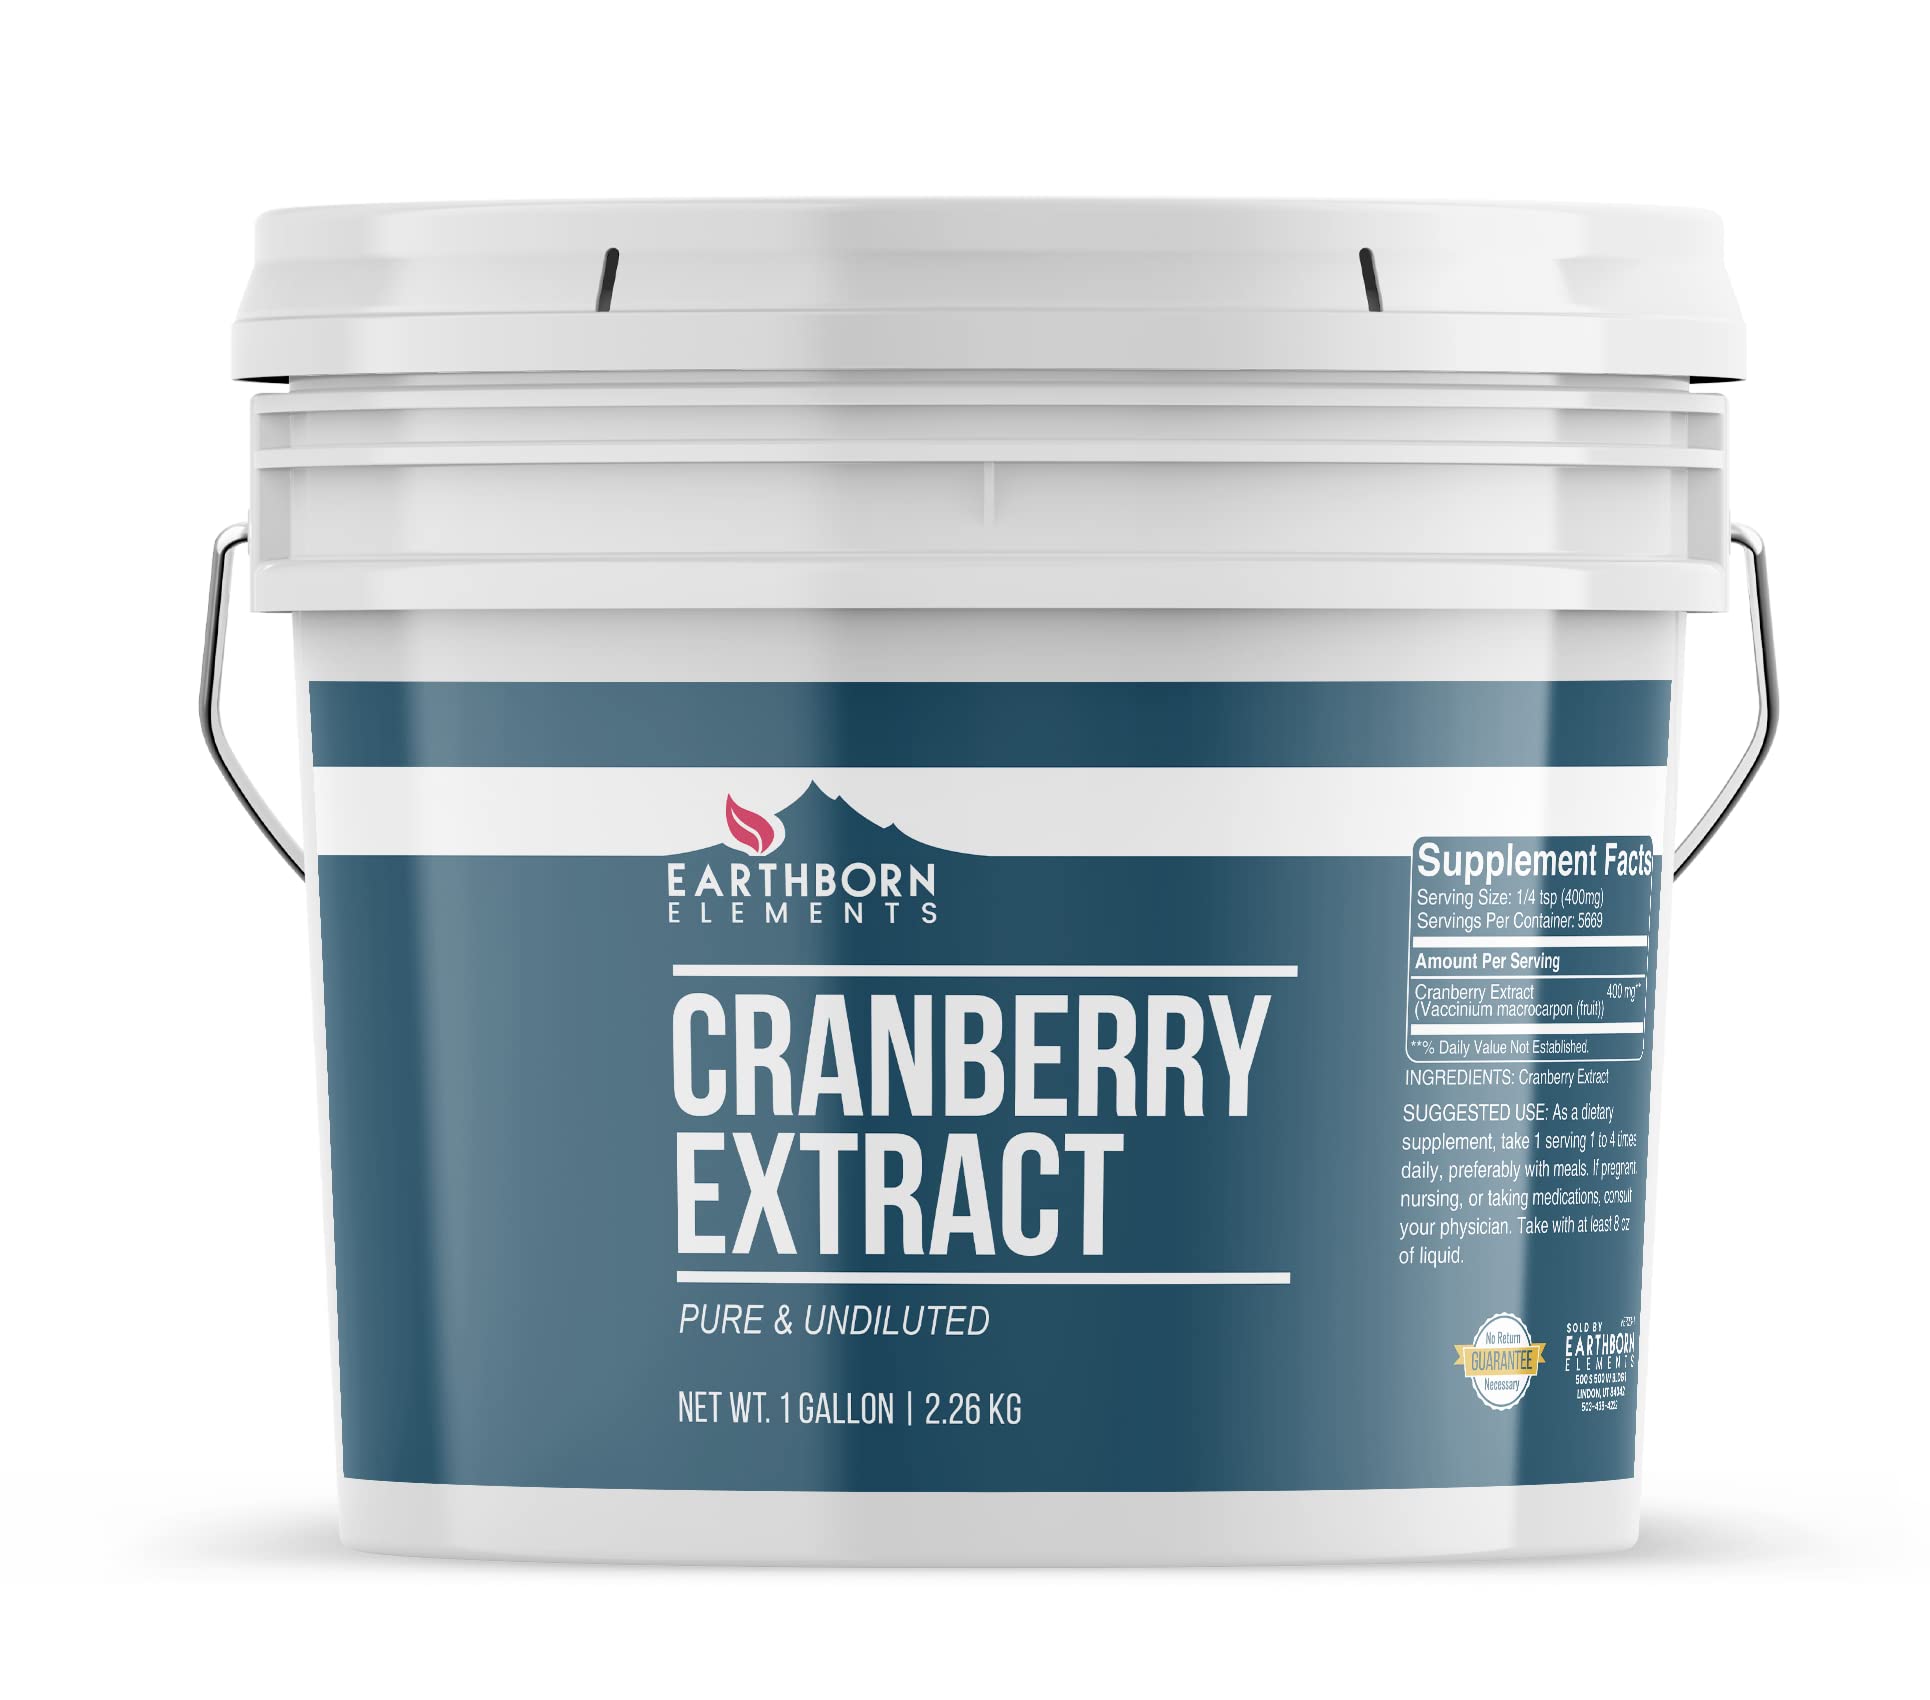 Earthborn Elements Turkey Tail Mushroom and Cranberry Extract Bundle, 1 Gallon Bucket, Pure & Undiluted, Herbal Supplements